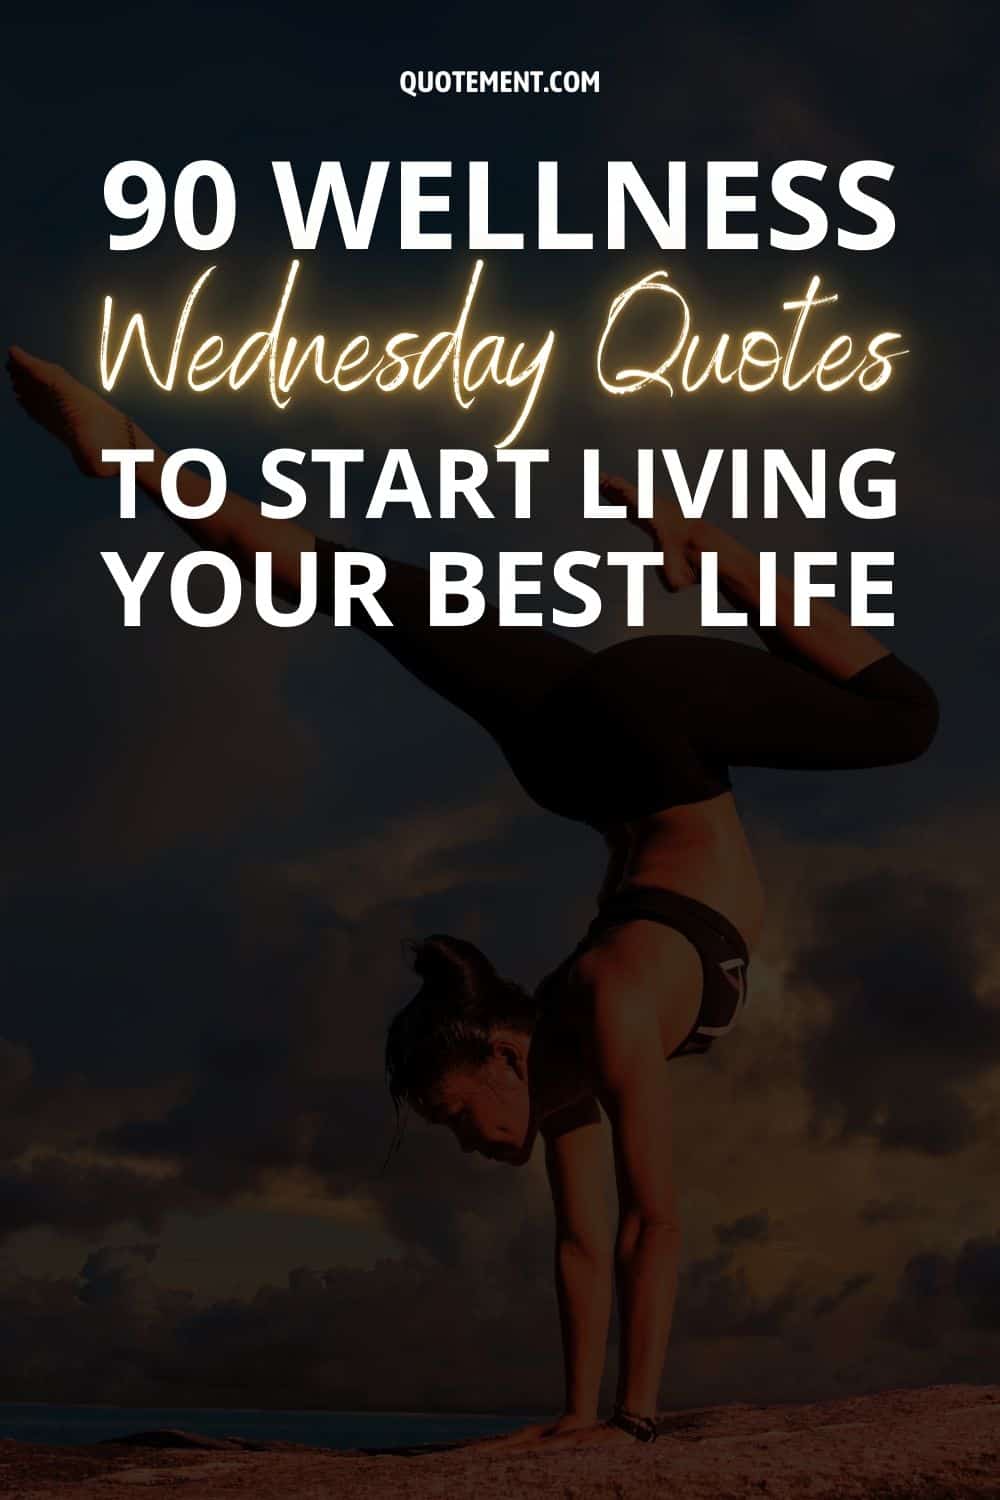 90 Wellness Wednesday Quotes To Start Living Your Best Life